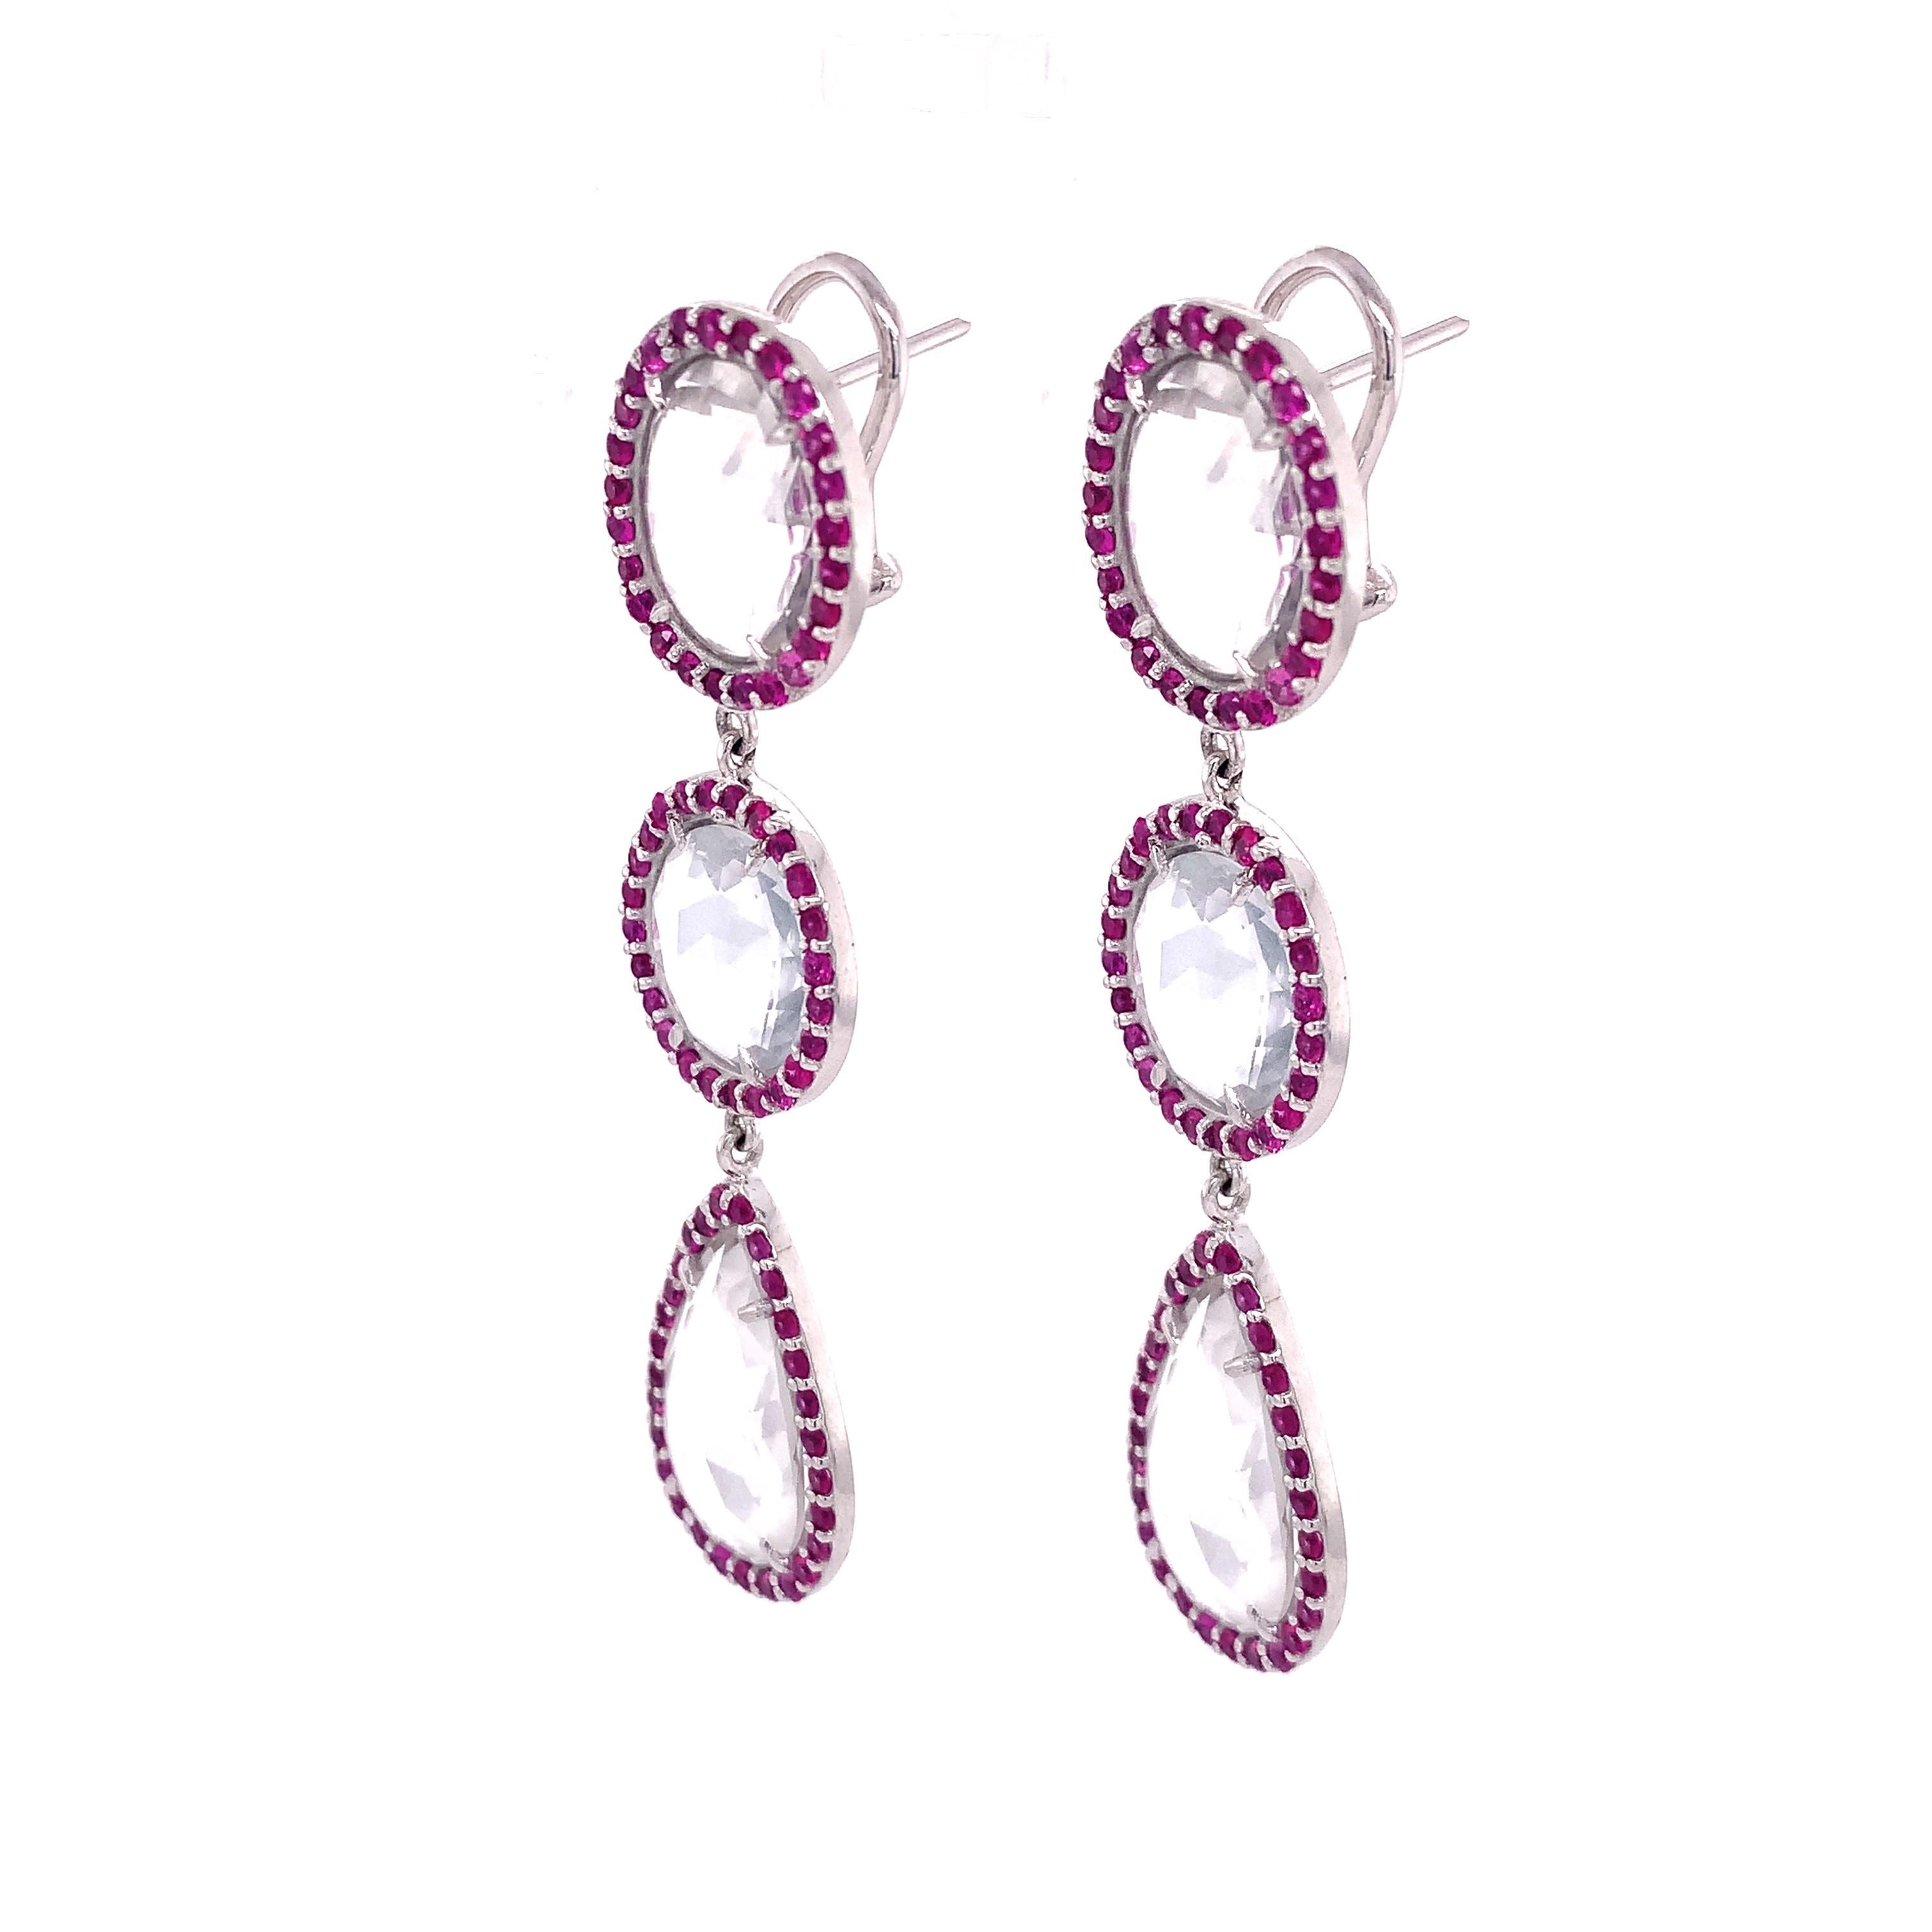 Contemporary Lucea New York White Topaz and Pink Sapphire Drop Earrings For Sale